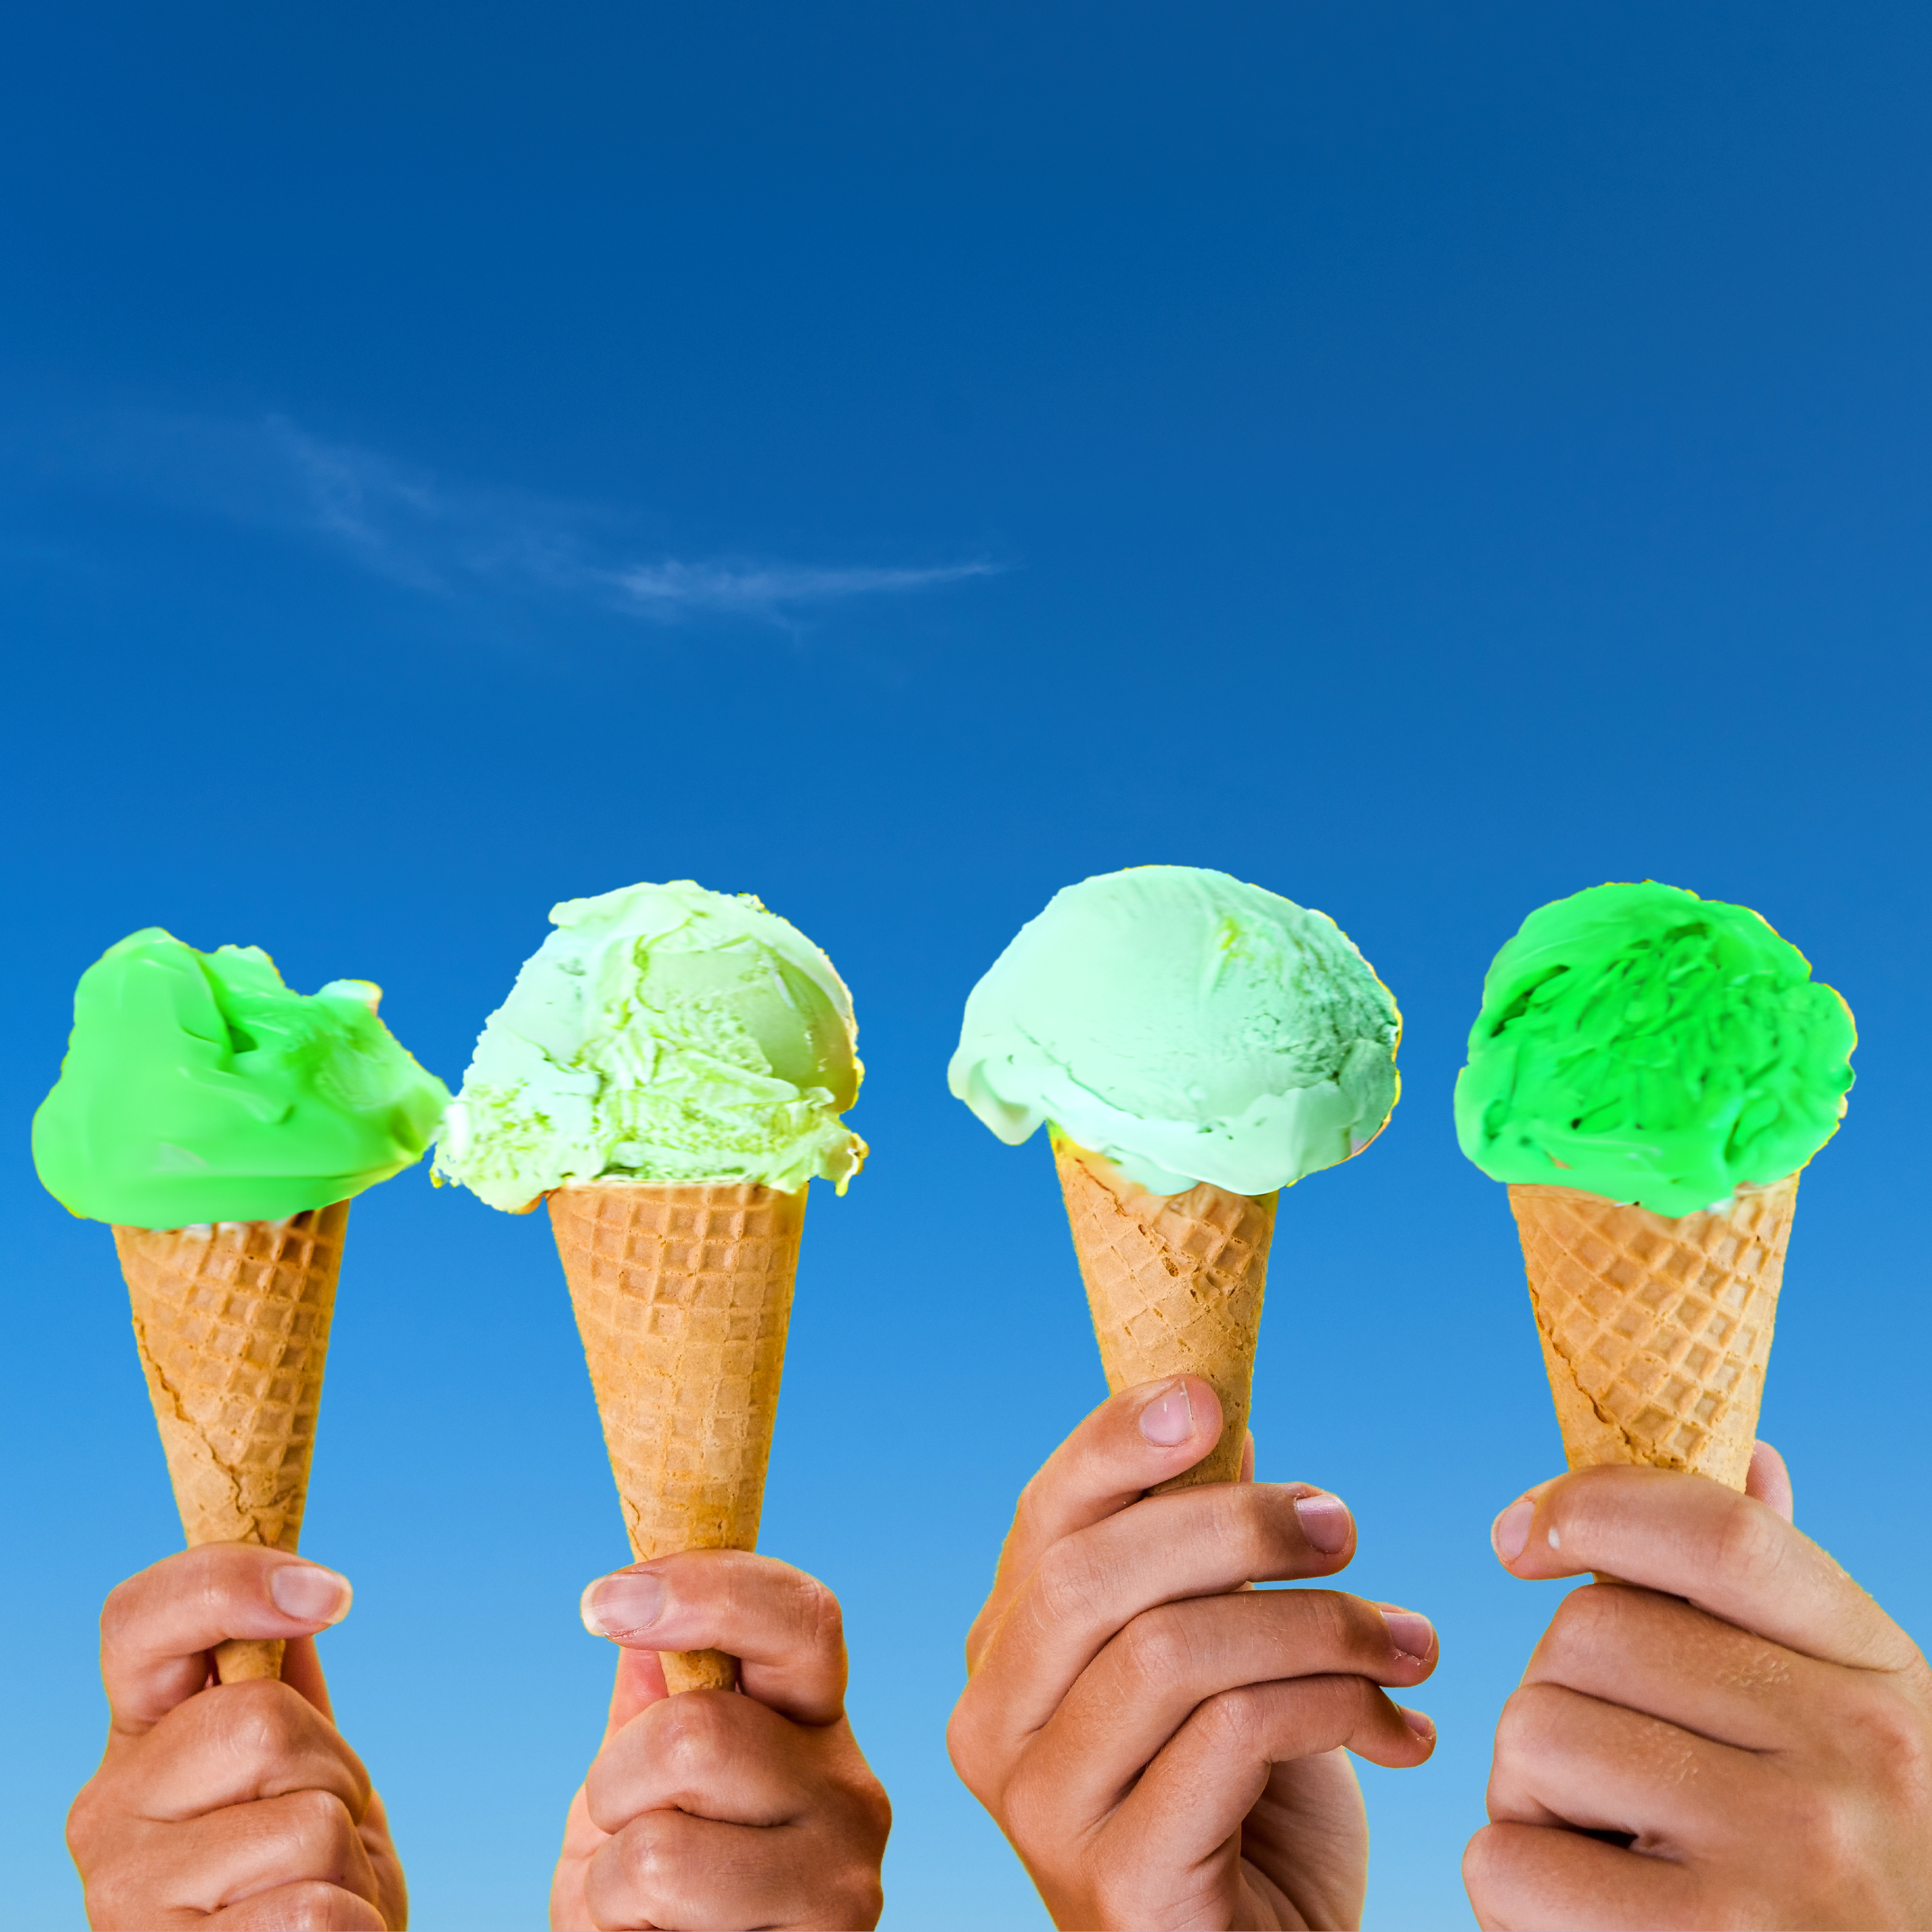 Different hands holding up different shades of green ice cream cones